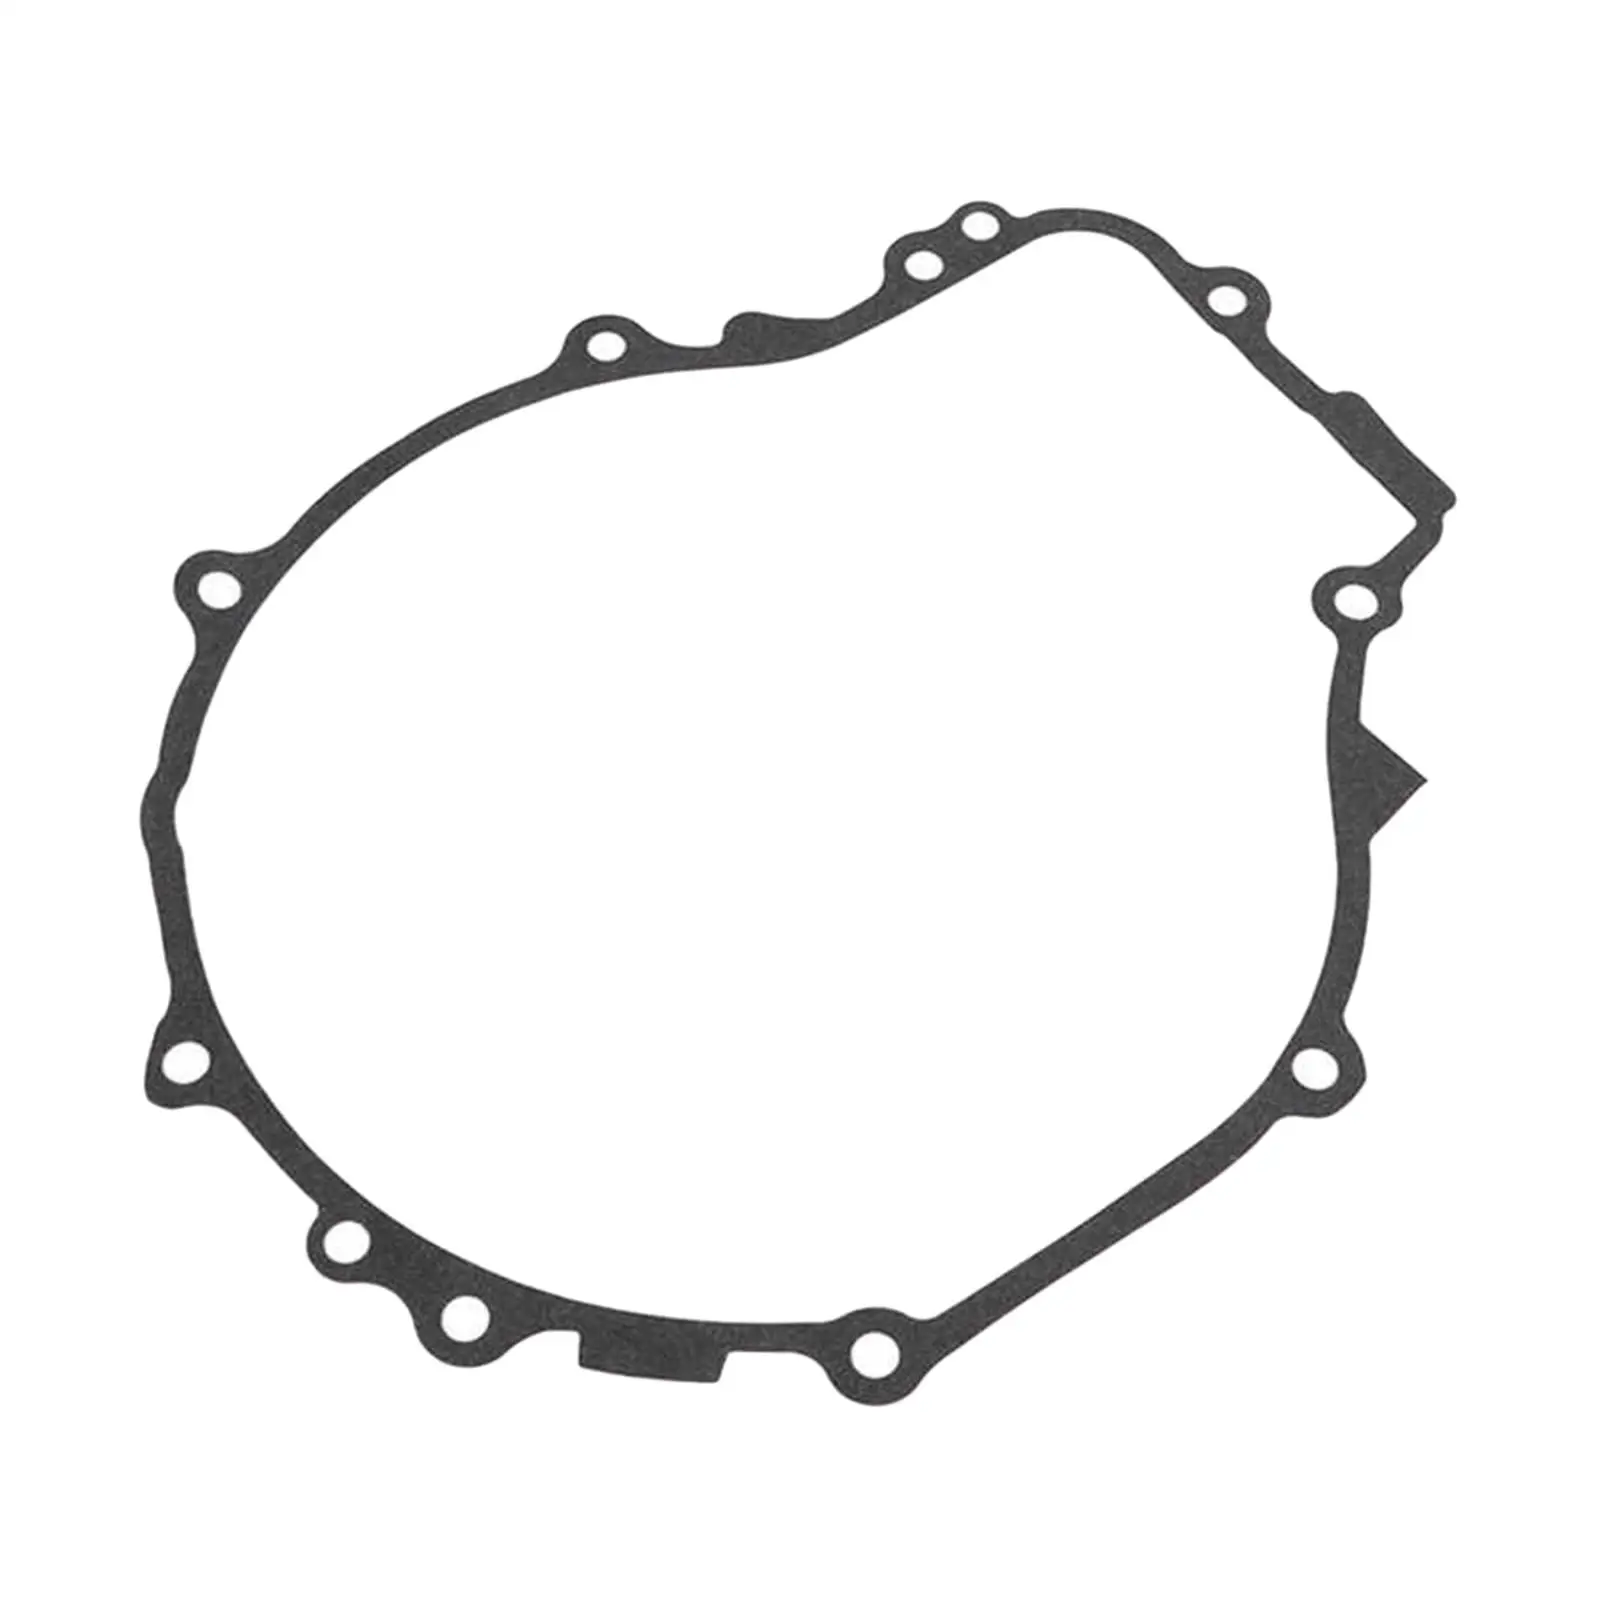 Automotive Pull Start Gasket, 3084933 for Polaris Sportsman 500 Replace Easy